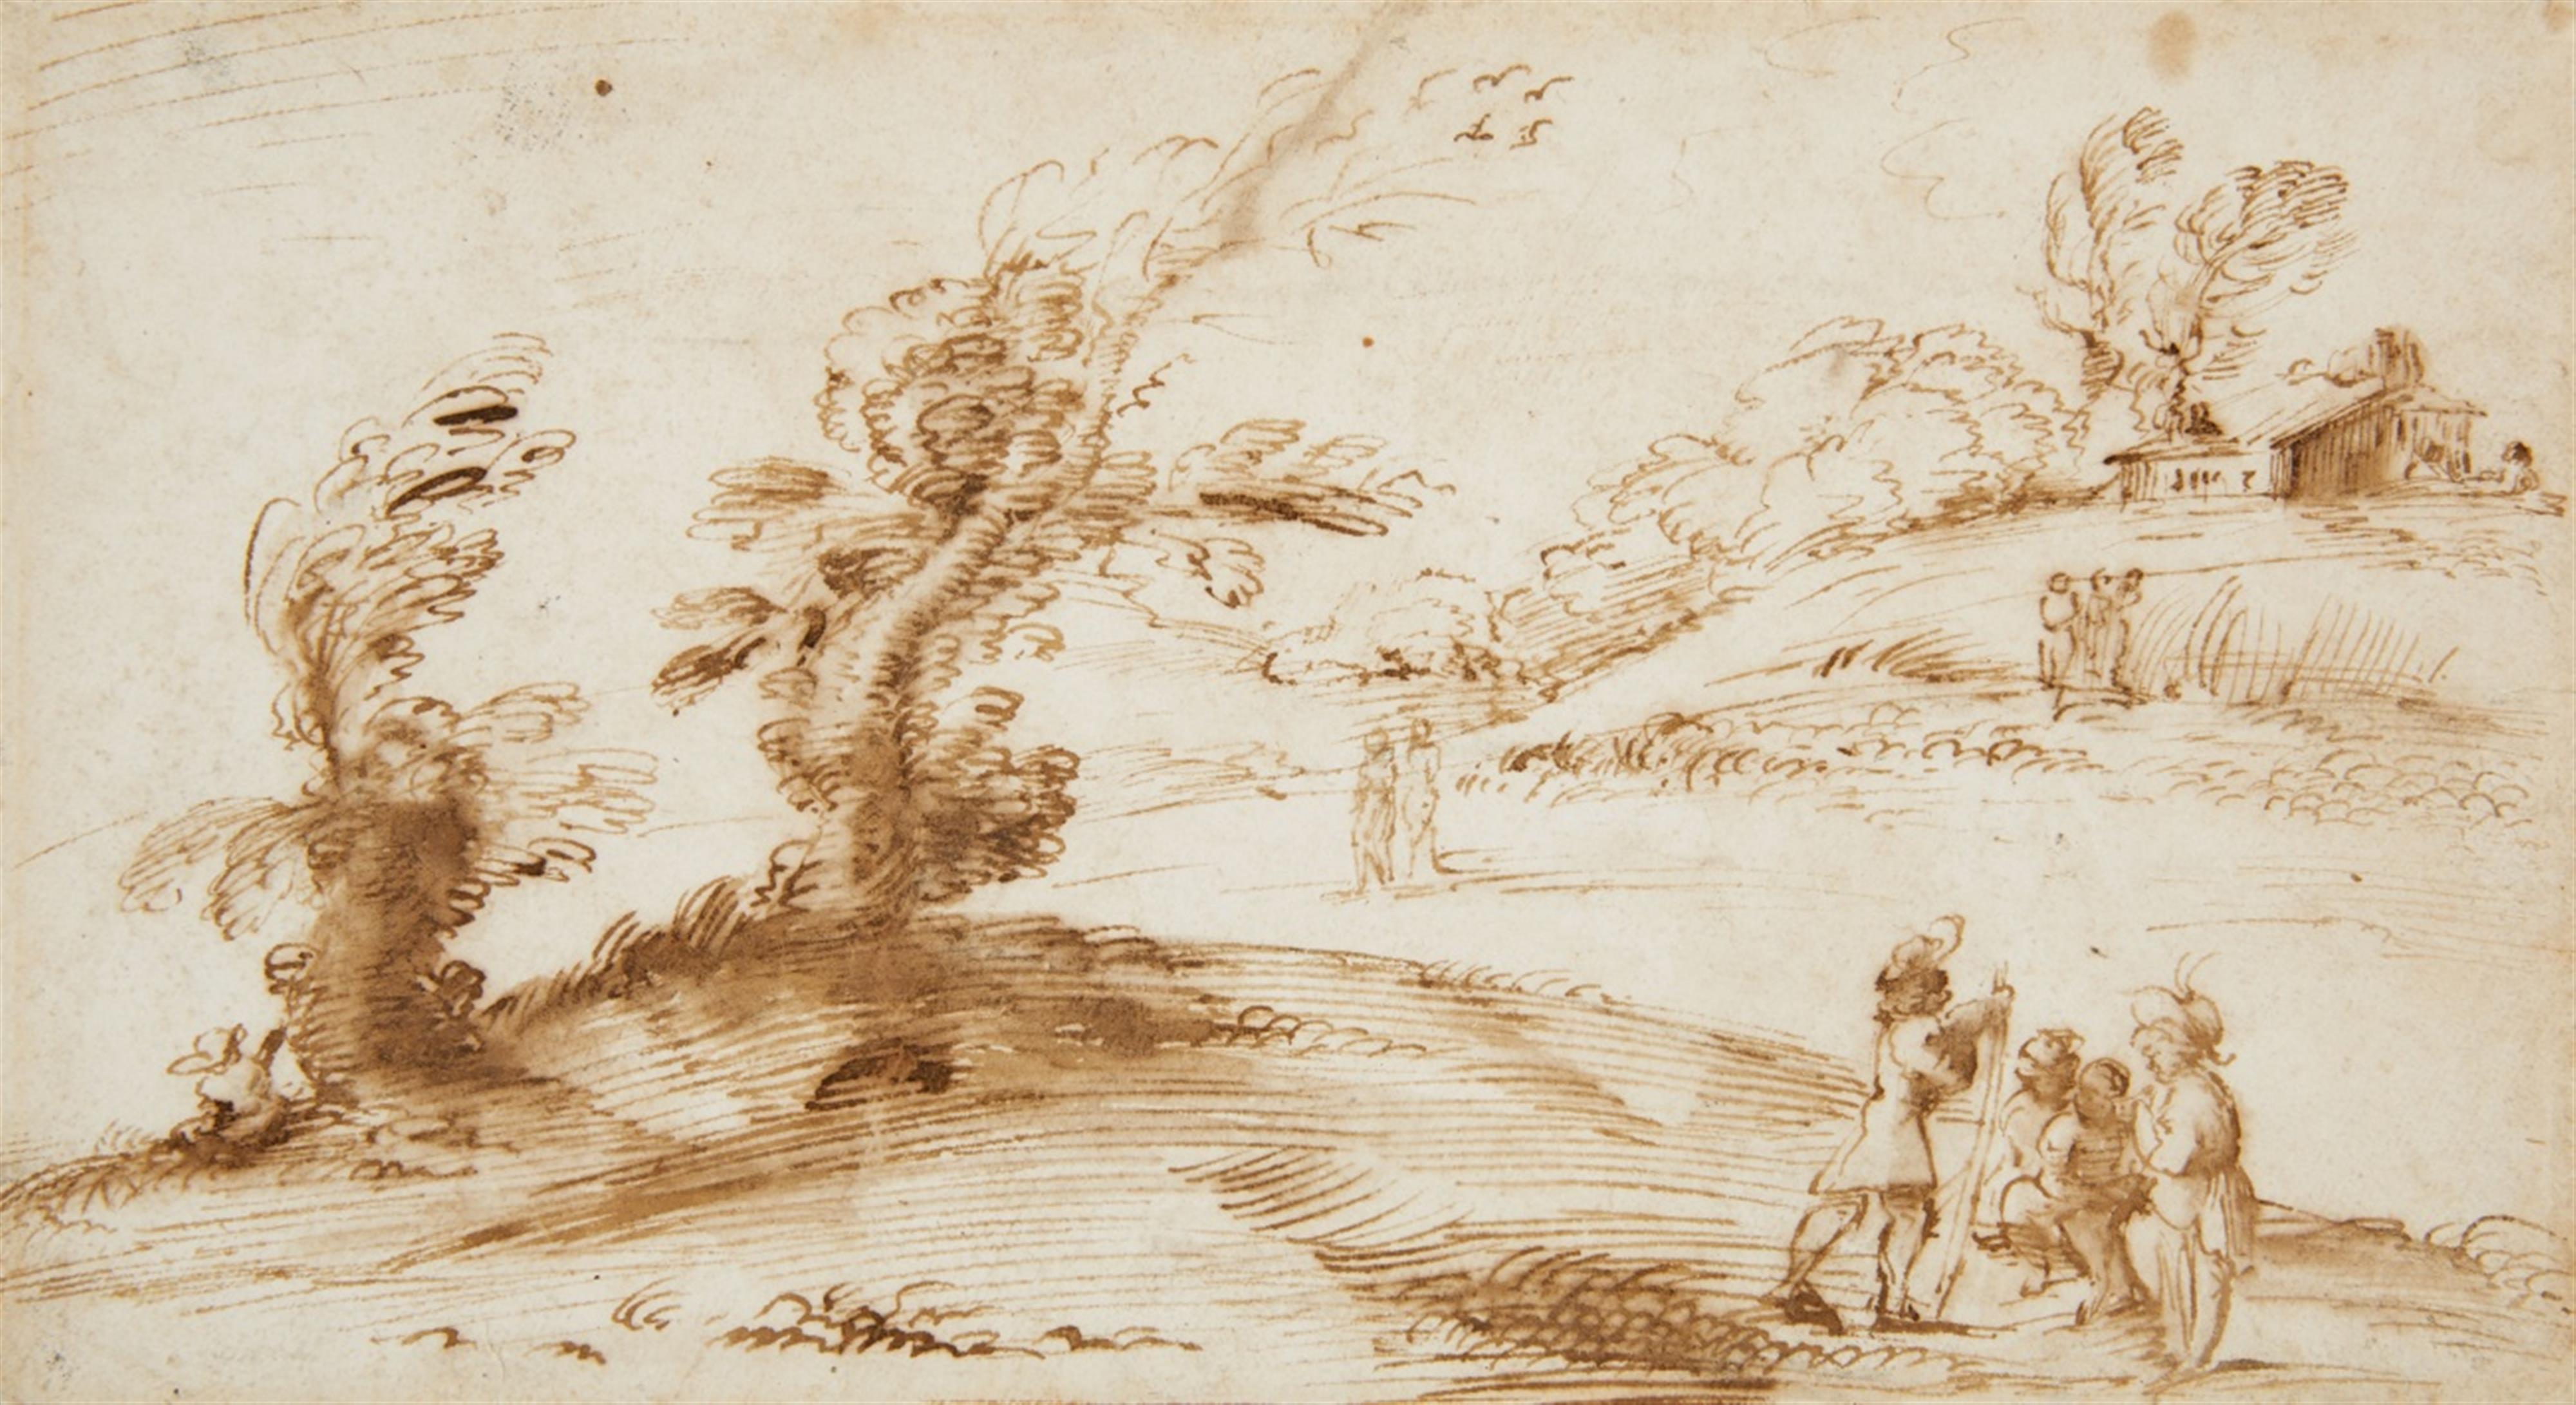 Bolognese School 17th century - Landscape with Trees, a Farm and Figures - image-1